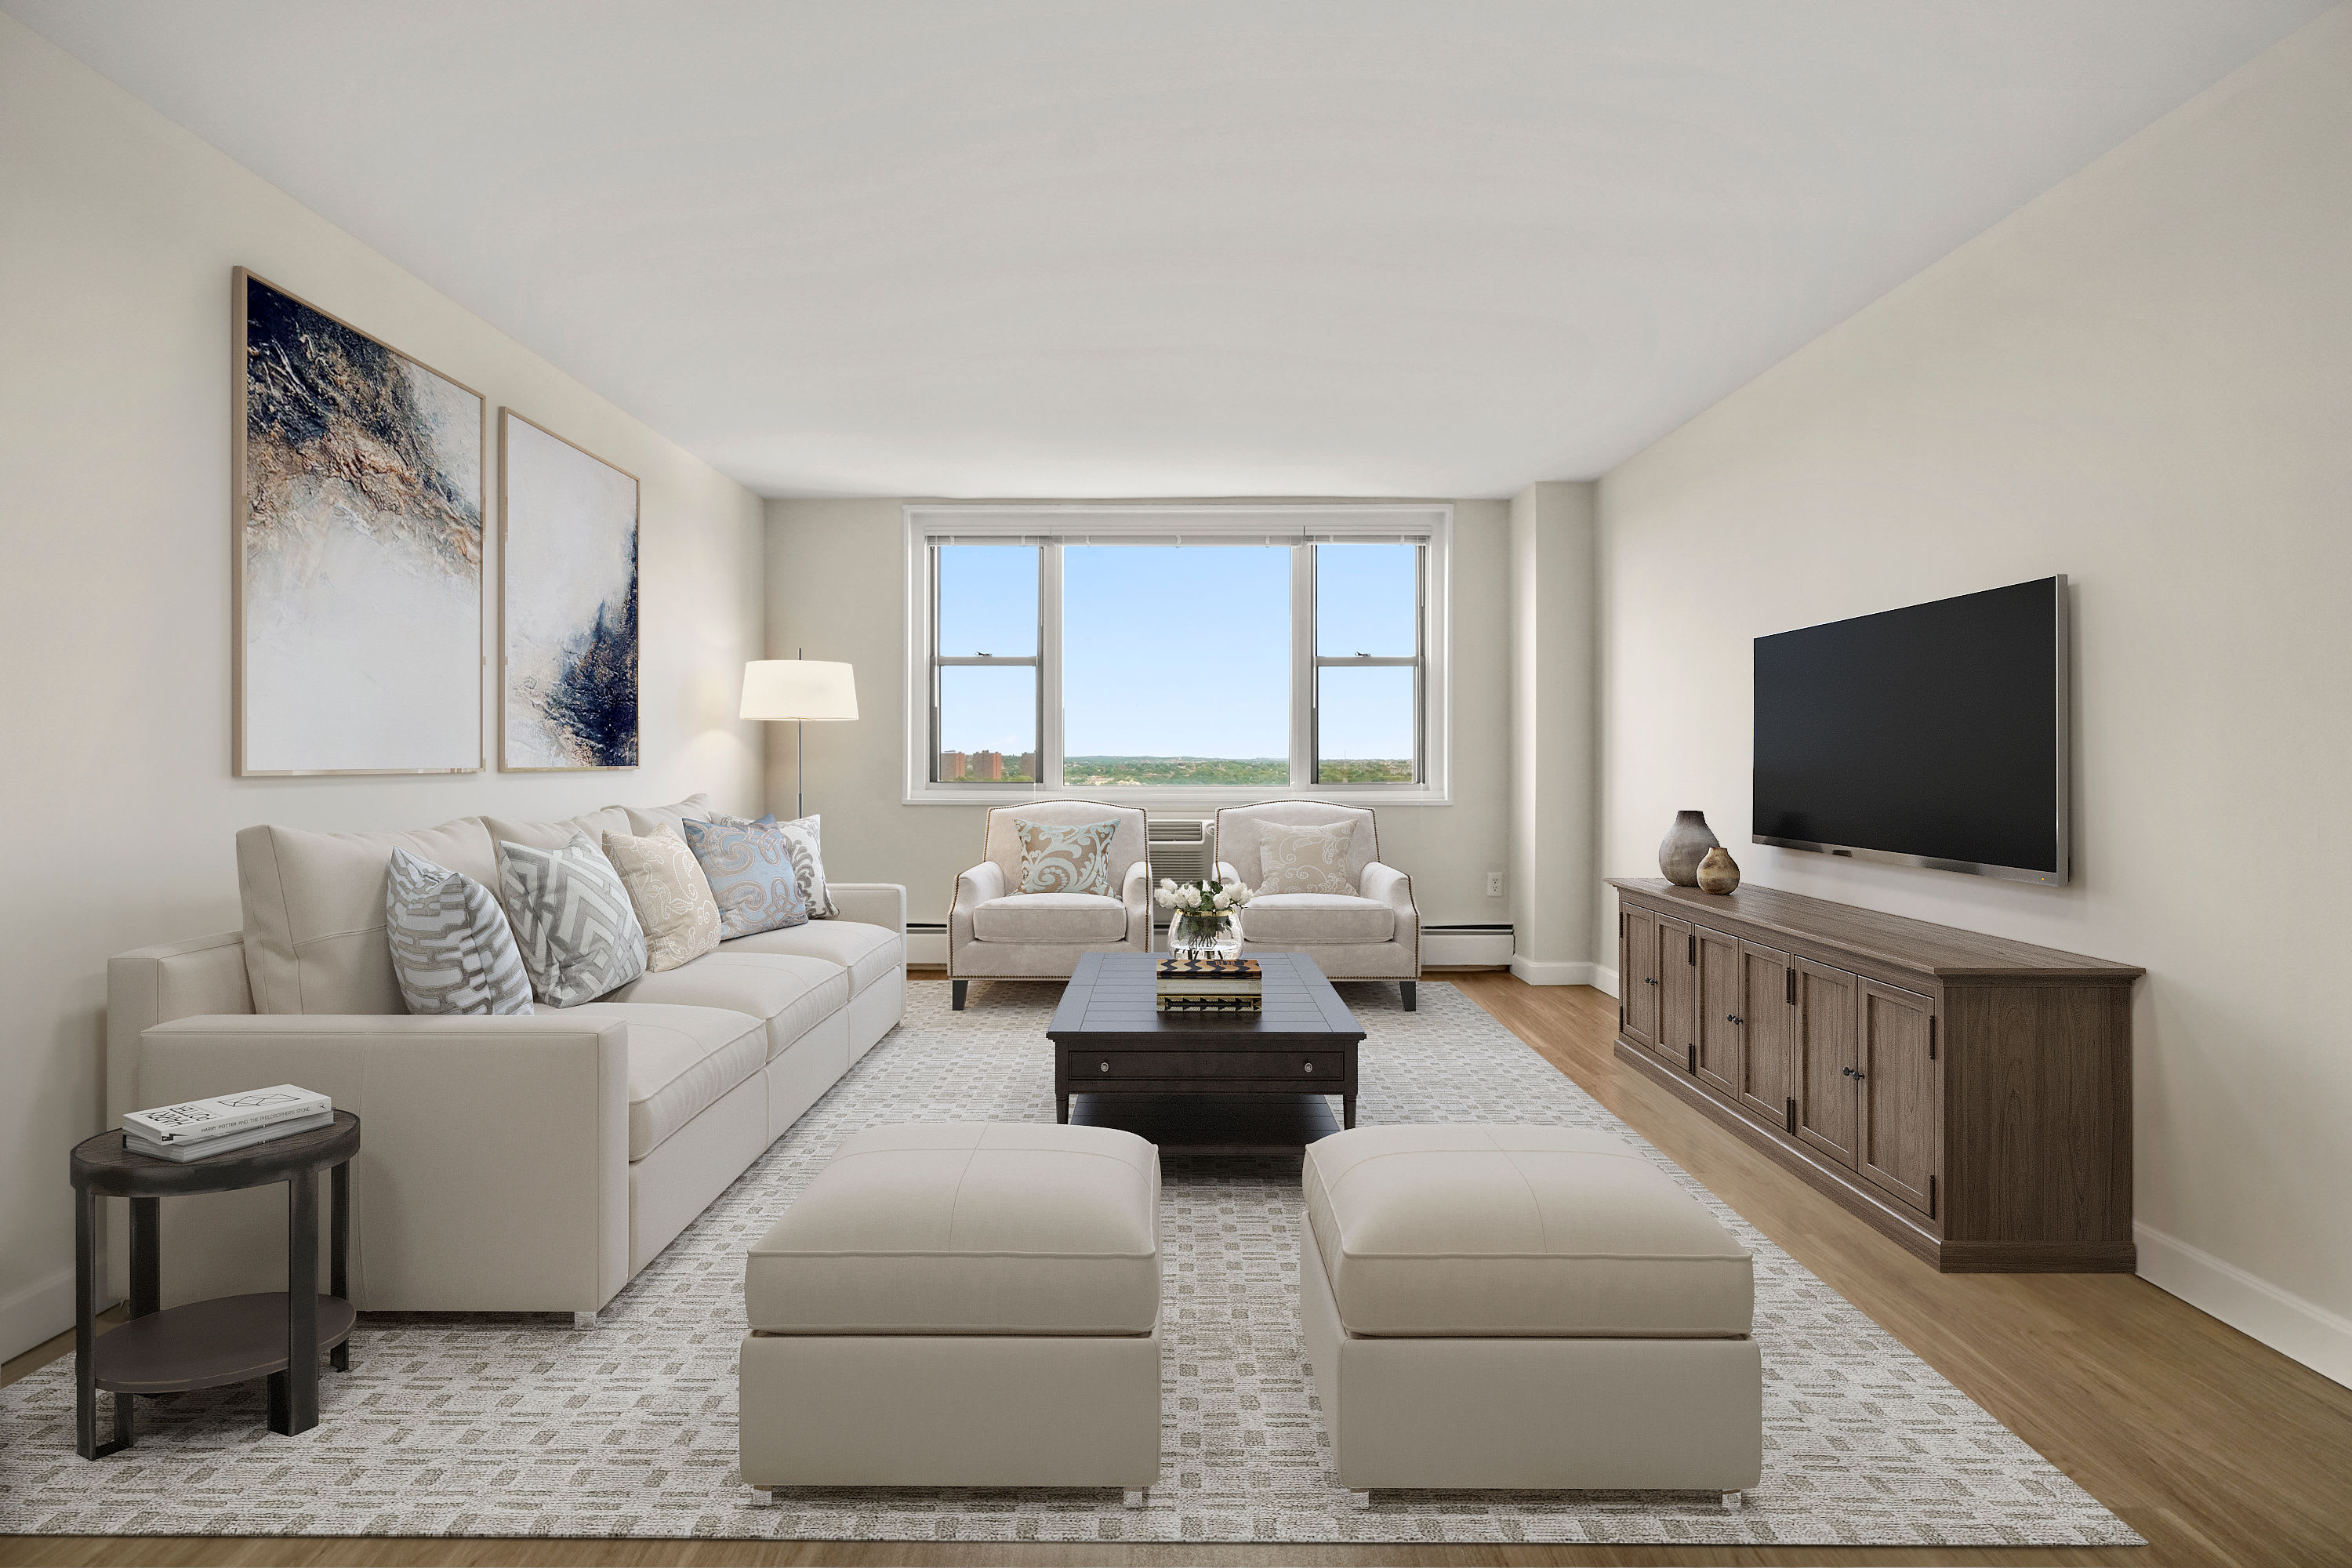 Living Room at Parkside Place in Cambridge, Massachusetts